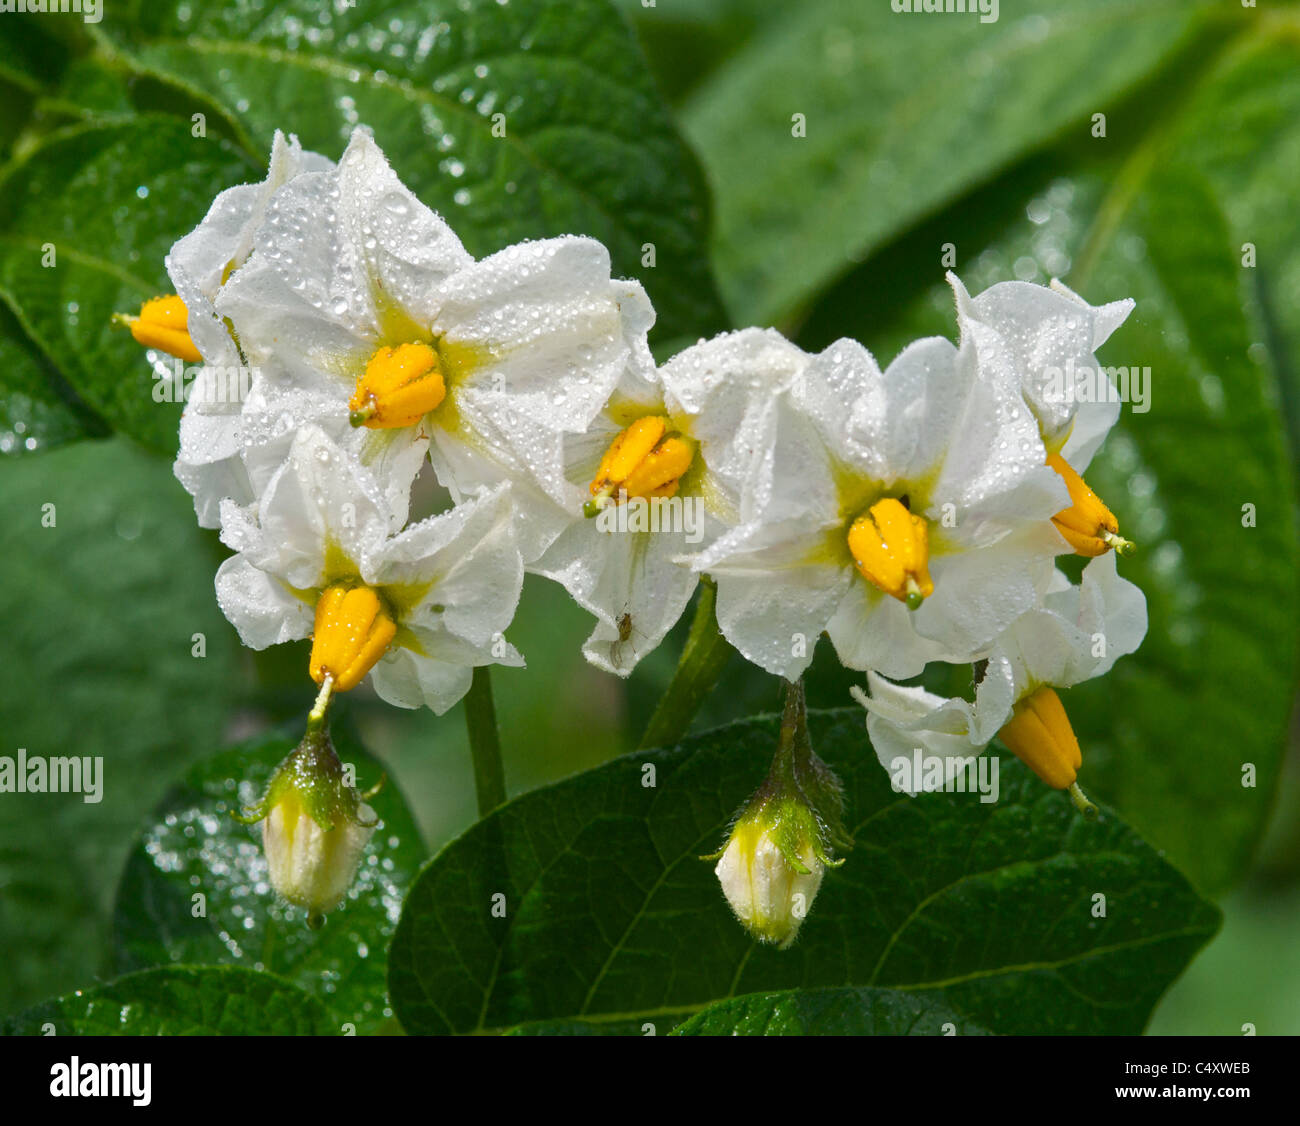 Potatoes growing in a cottage garden in flower Stock Photo